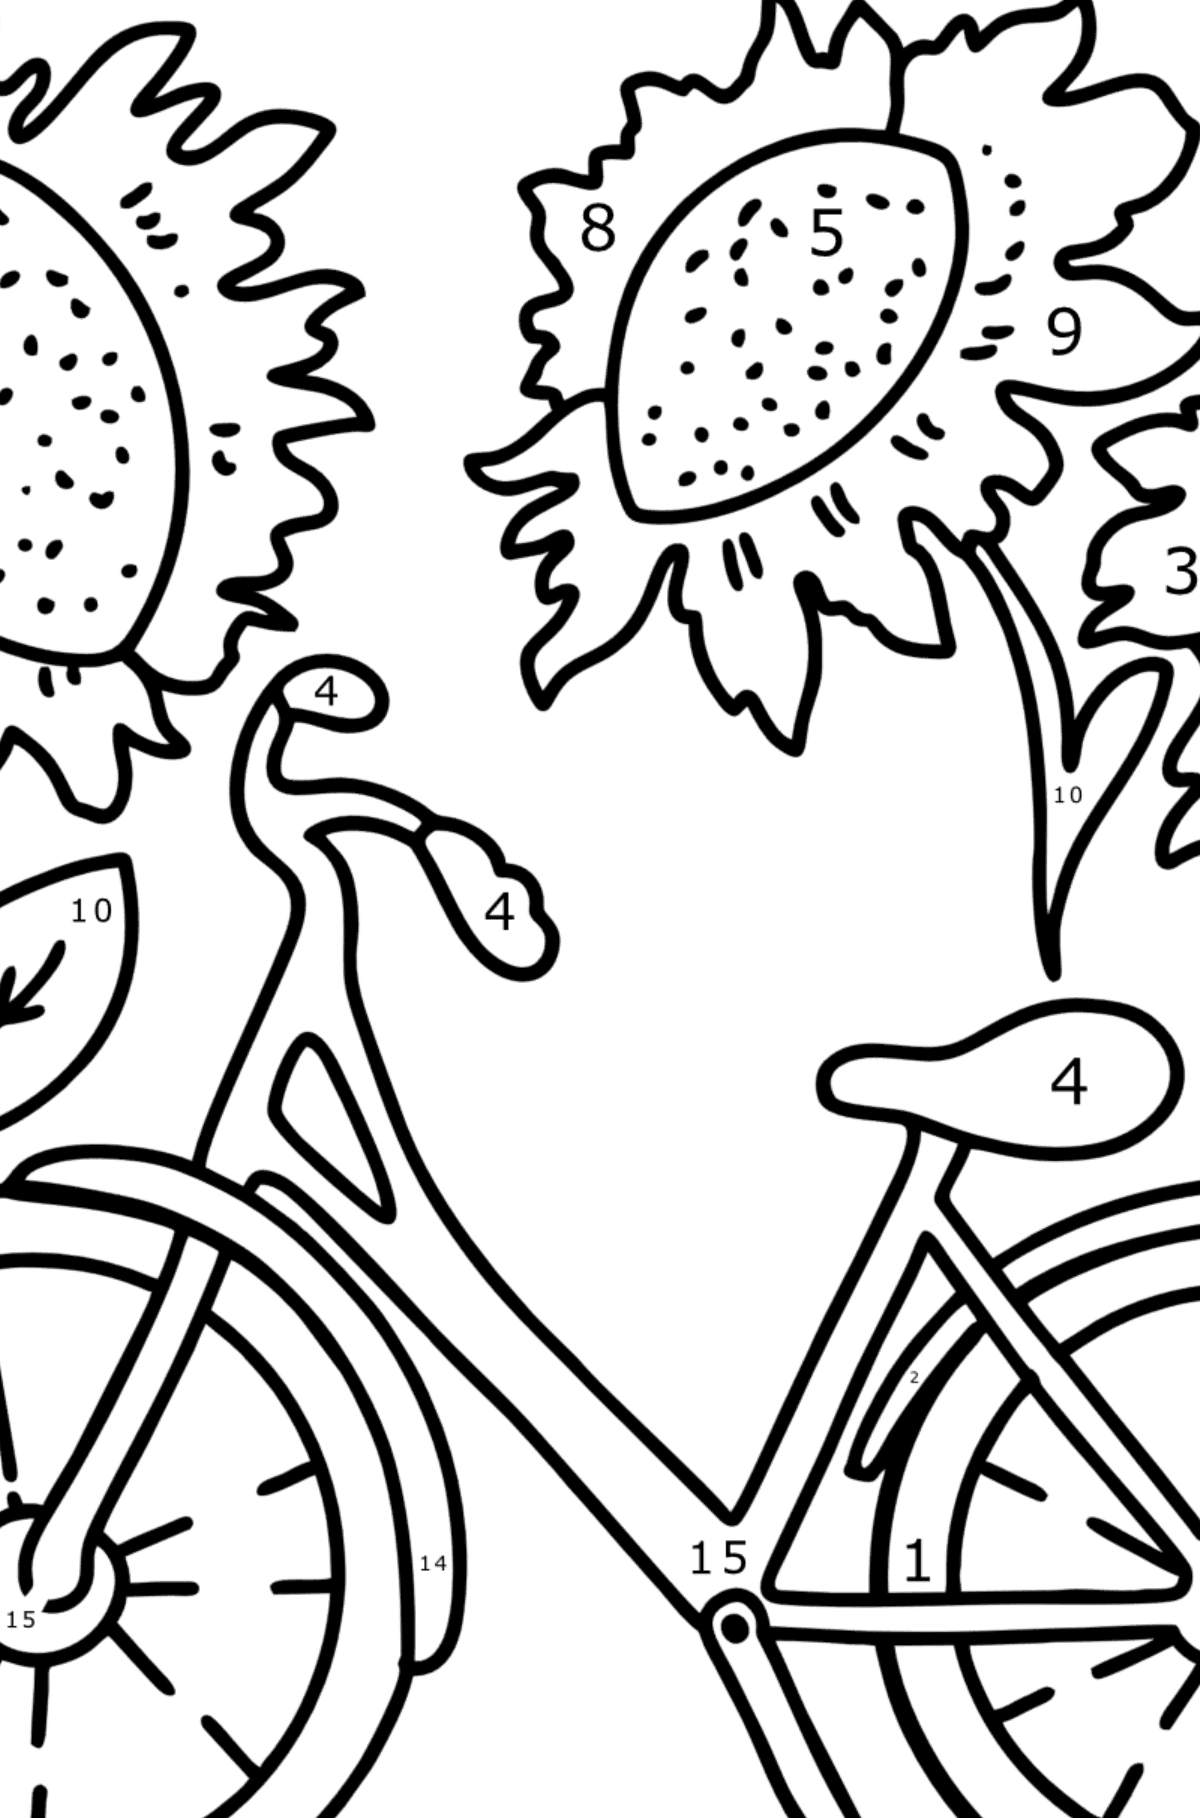 Summer Coloring page - Bicycle and Sunflowers - Coloring by Numbers for Kids